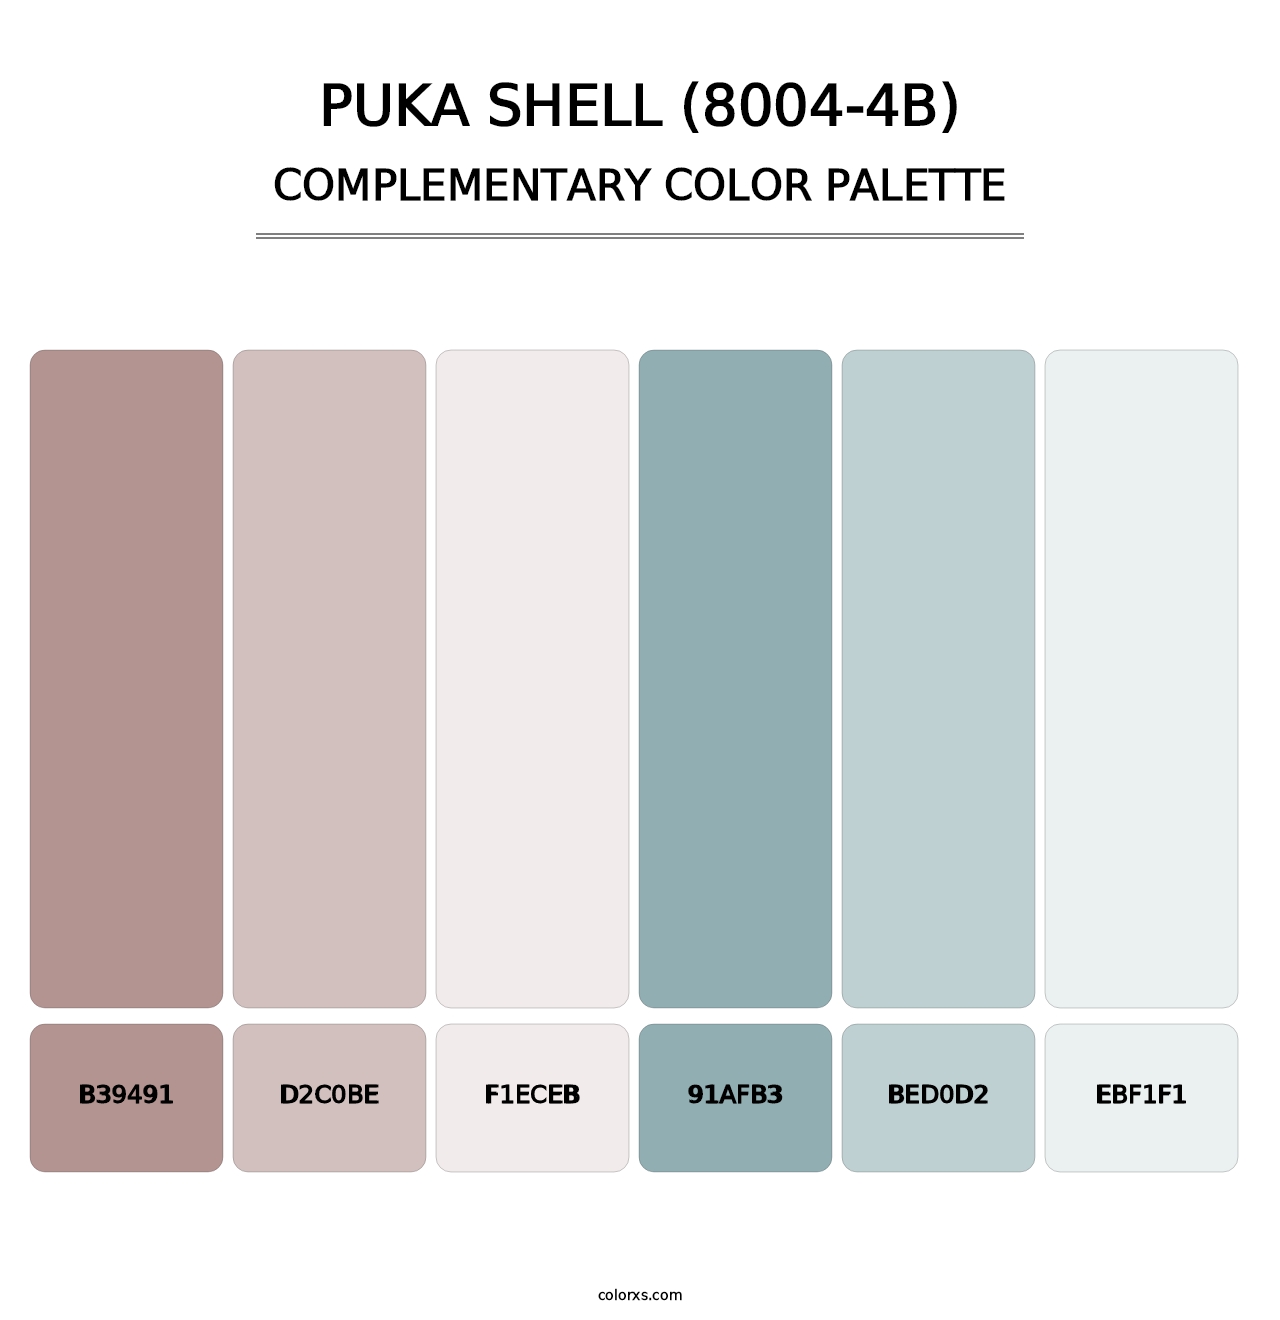 Puka Shell (8004-4B) - Complementary Color Palette